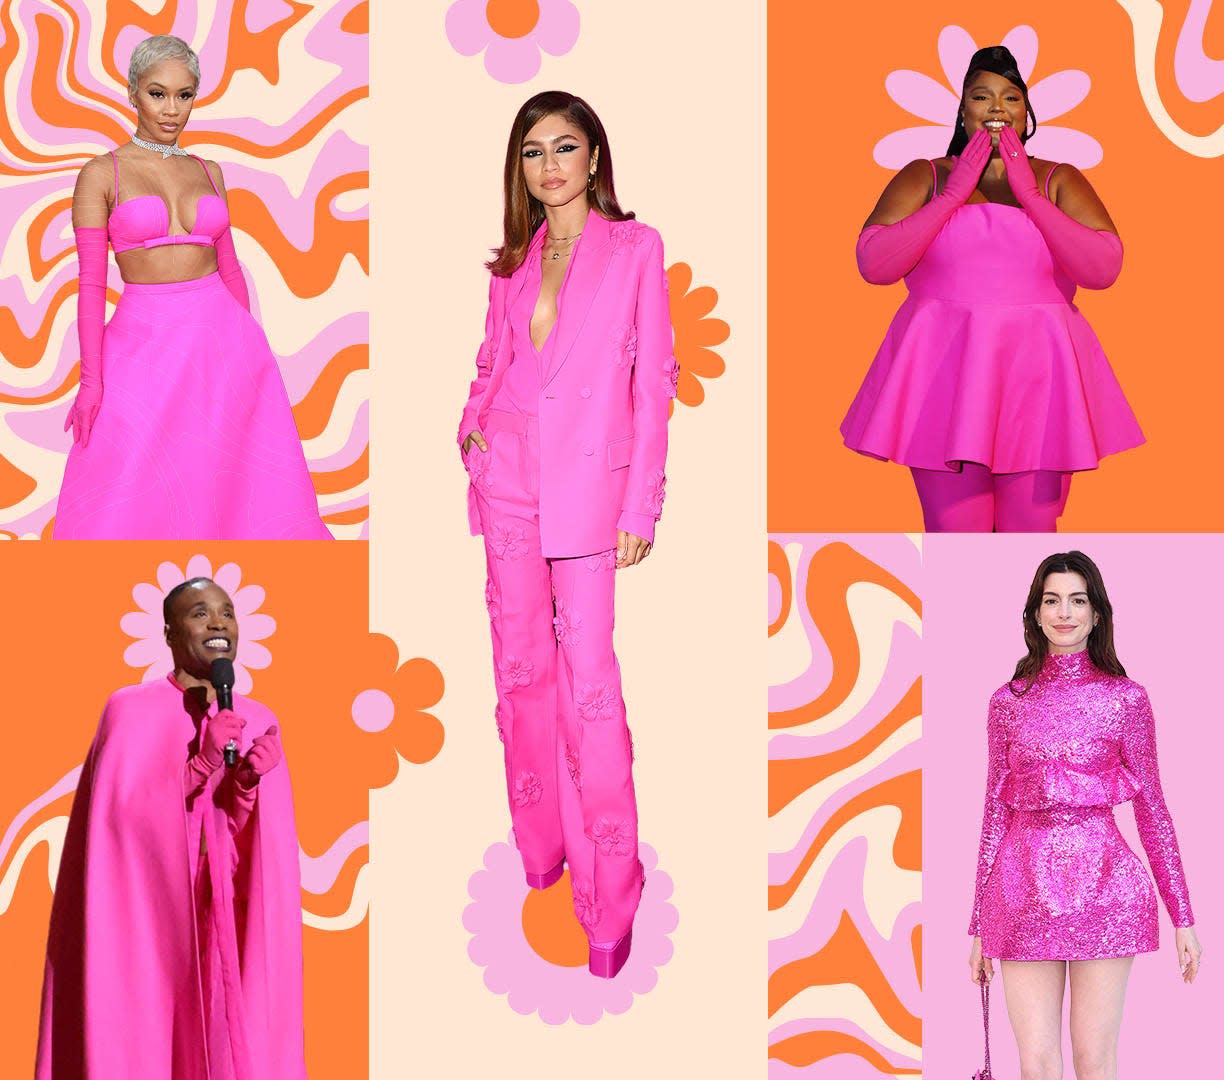 Saweetie, Billy Porter, Zendaya, Lizzo and Anne Hathaway embraced the hot pink trend.